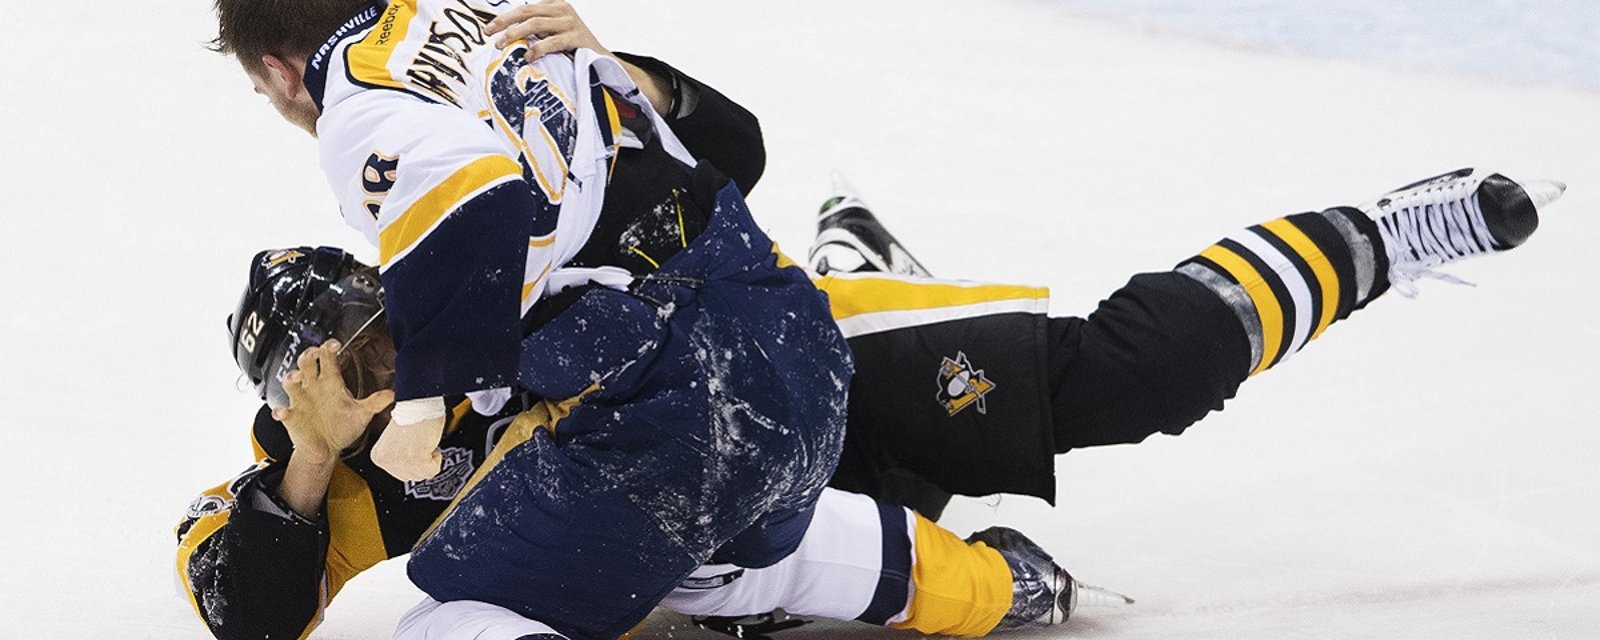 Viktor Arvidsson calls out his former team after being traded.